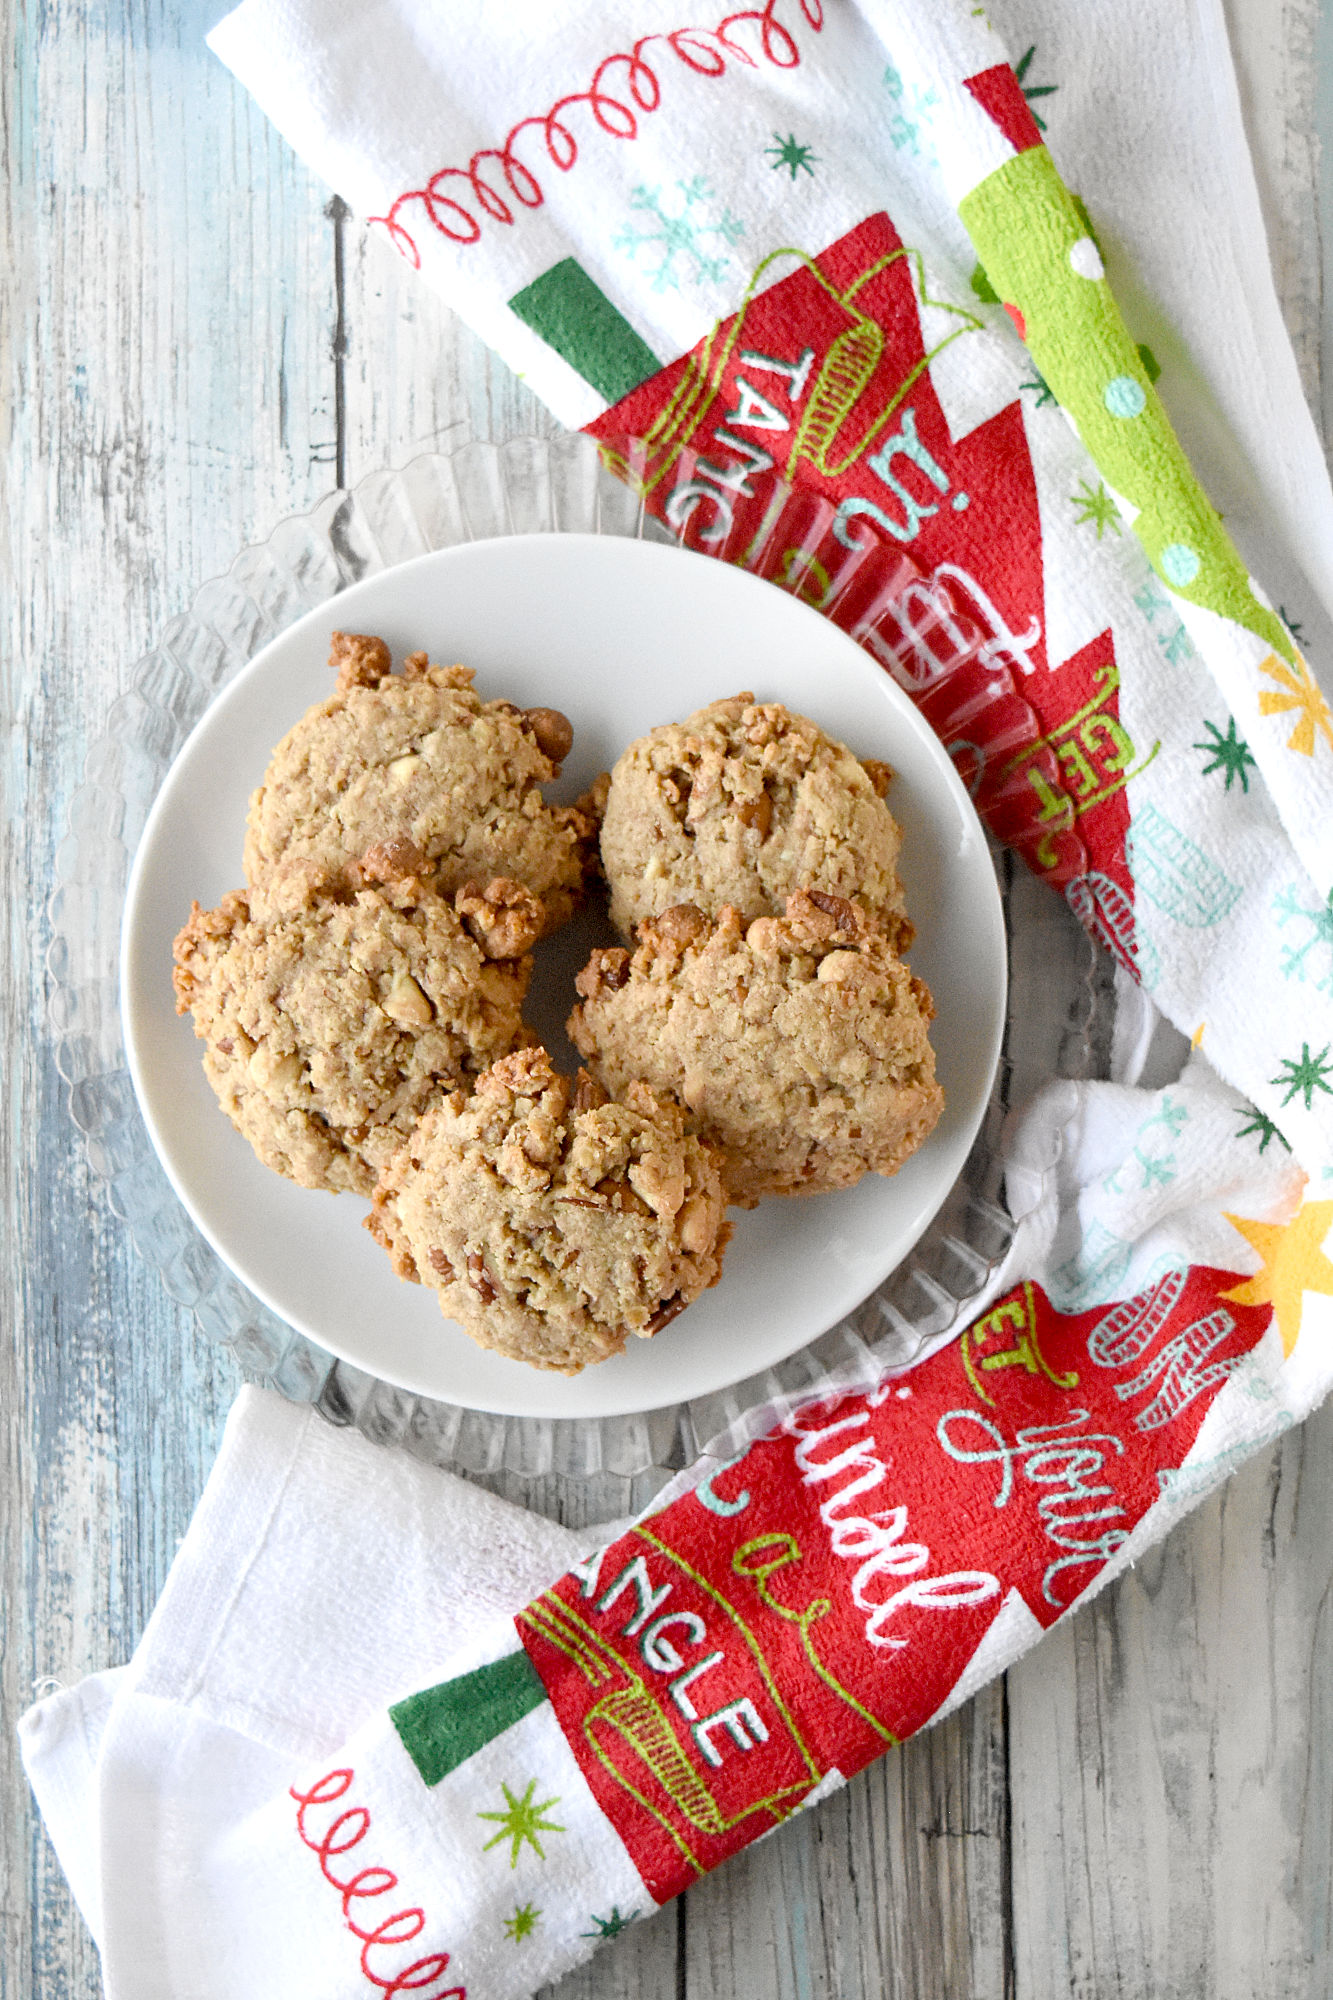 Oatmeal Pecan Cookies are slightly sweet with hearty oats, cinnamon, and crunchy pecans. They’re chewy and crunchy delicious. #ChristmasCookiesWeek